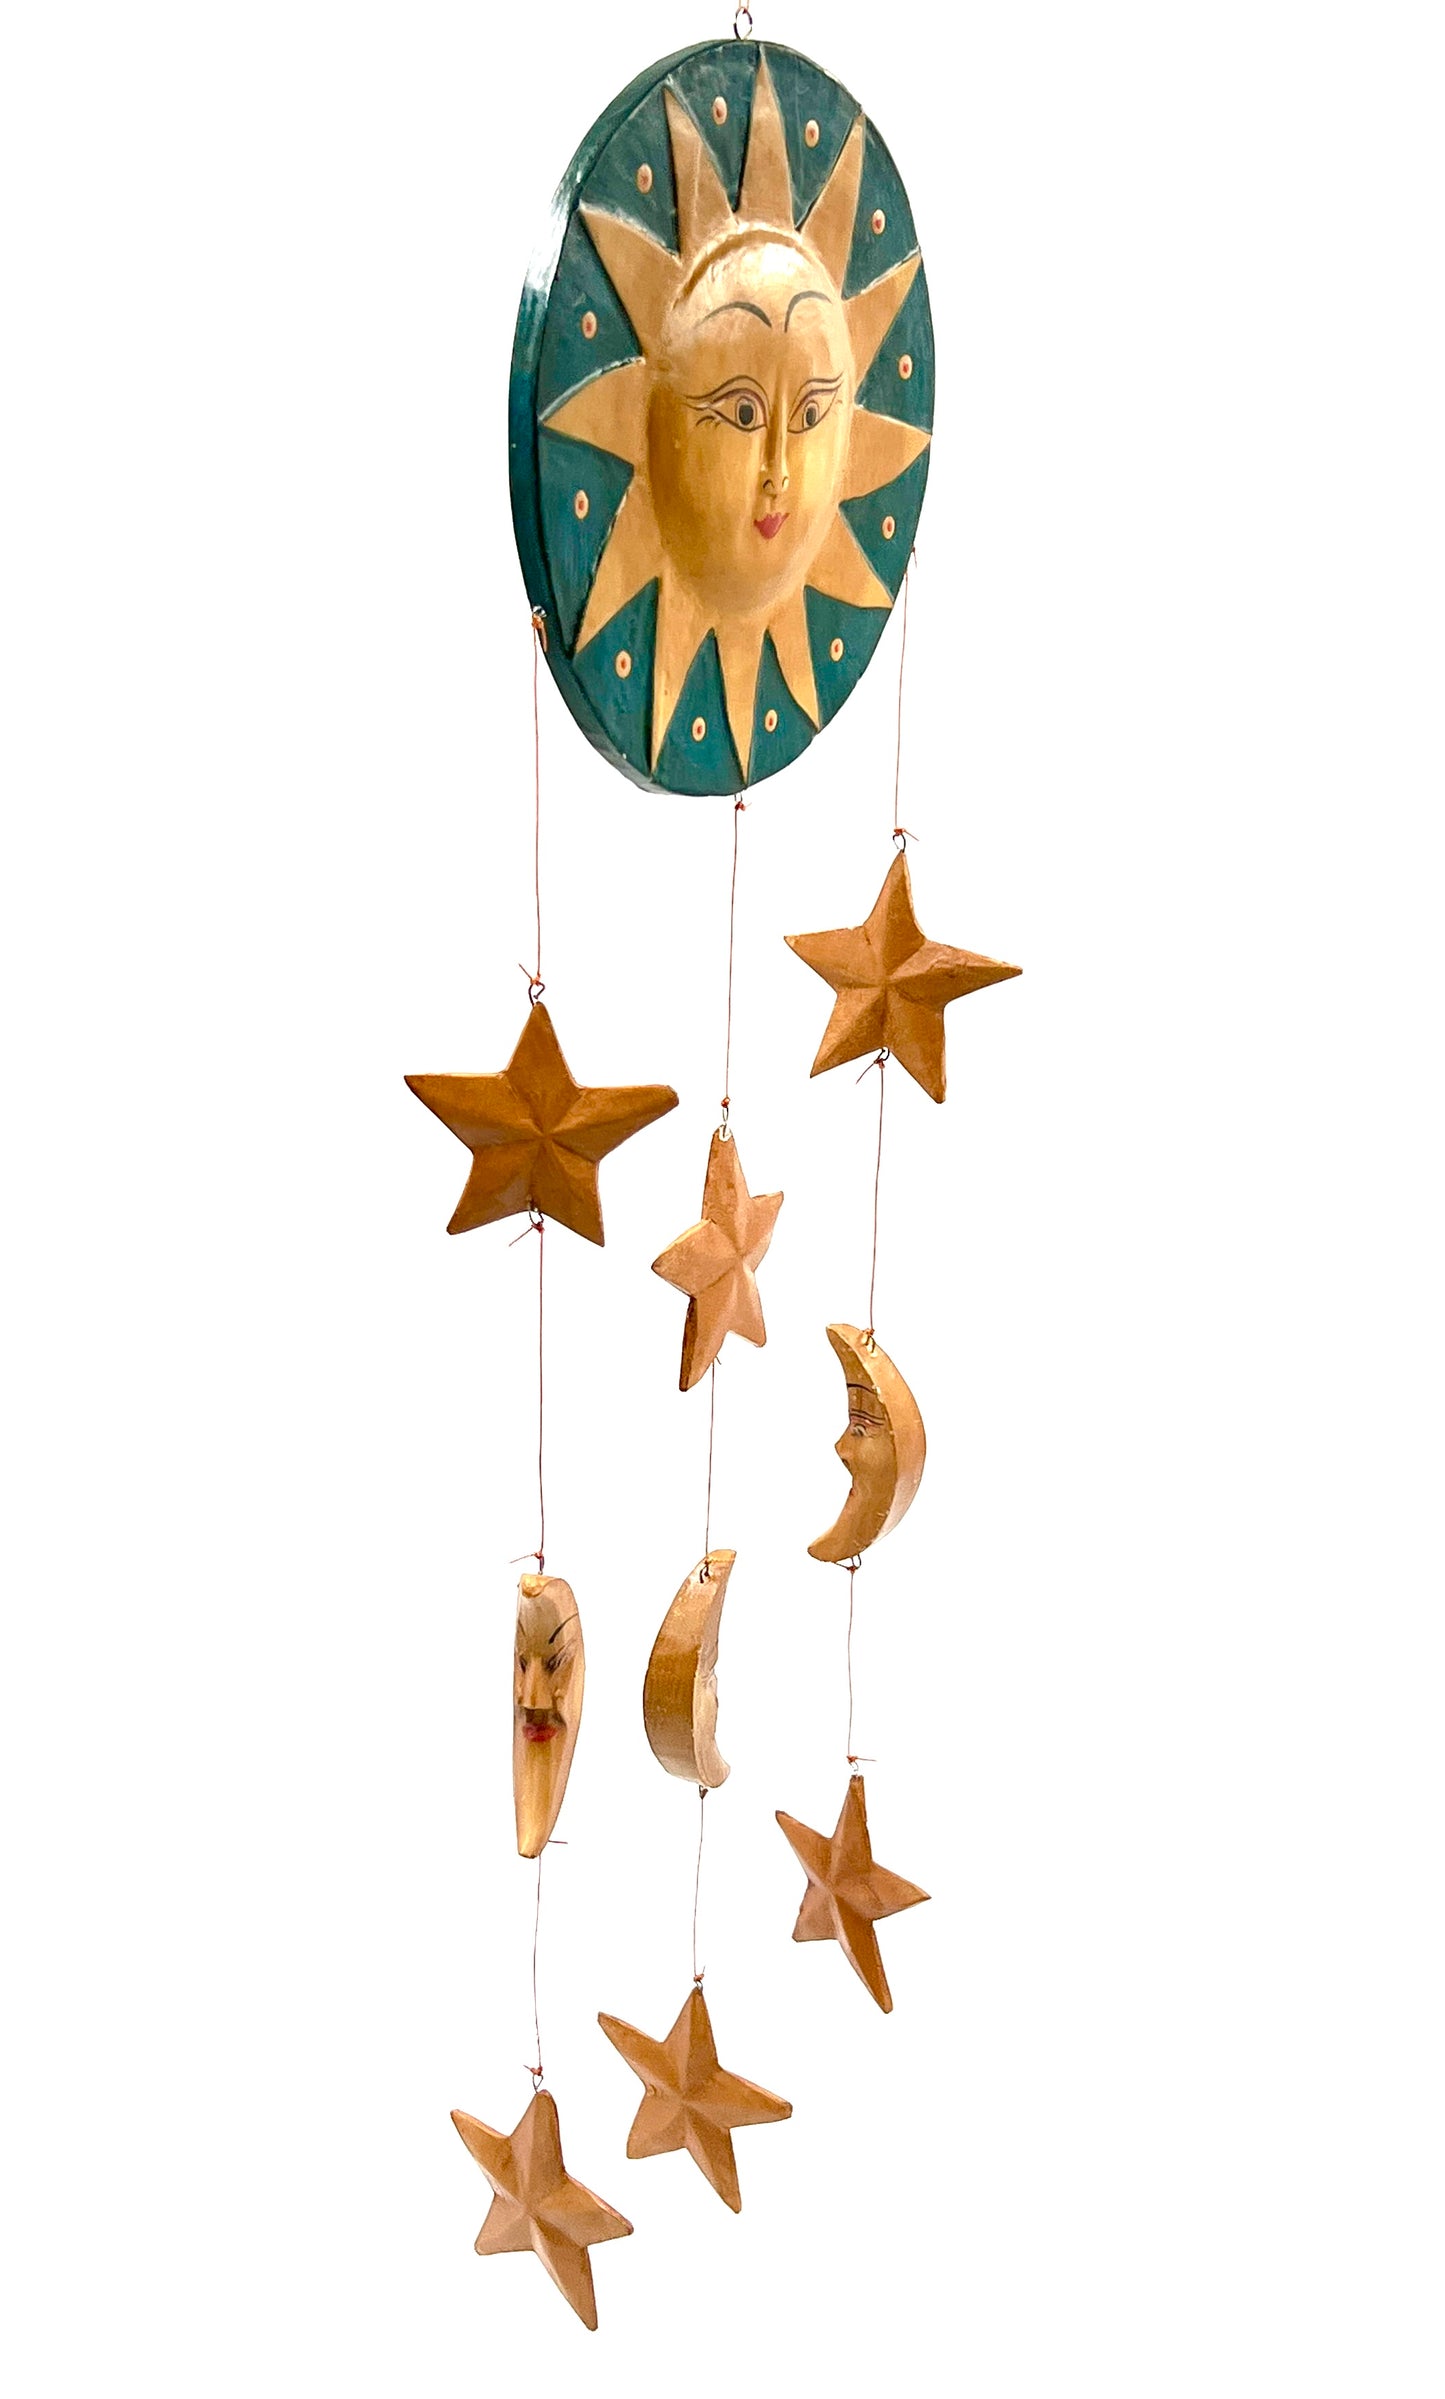 Sun & Moon Painted Mobiles